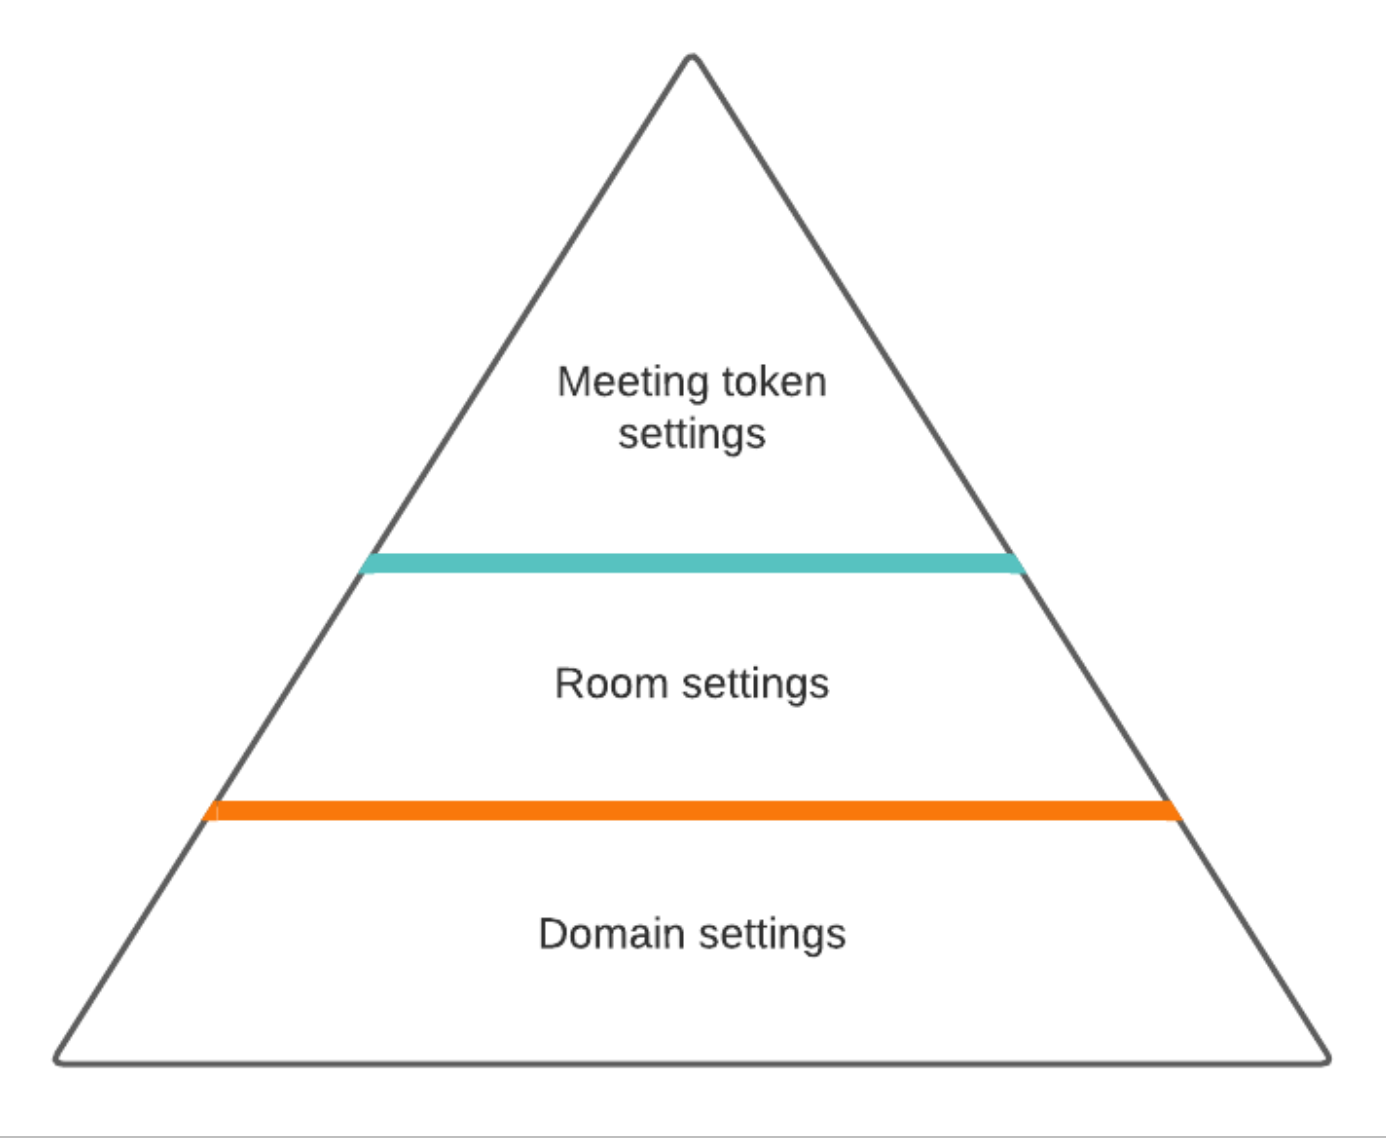 Hierarchy of configurations, with meeting tokens being the highest priority, and domain settings being the lowest (or most general)